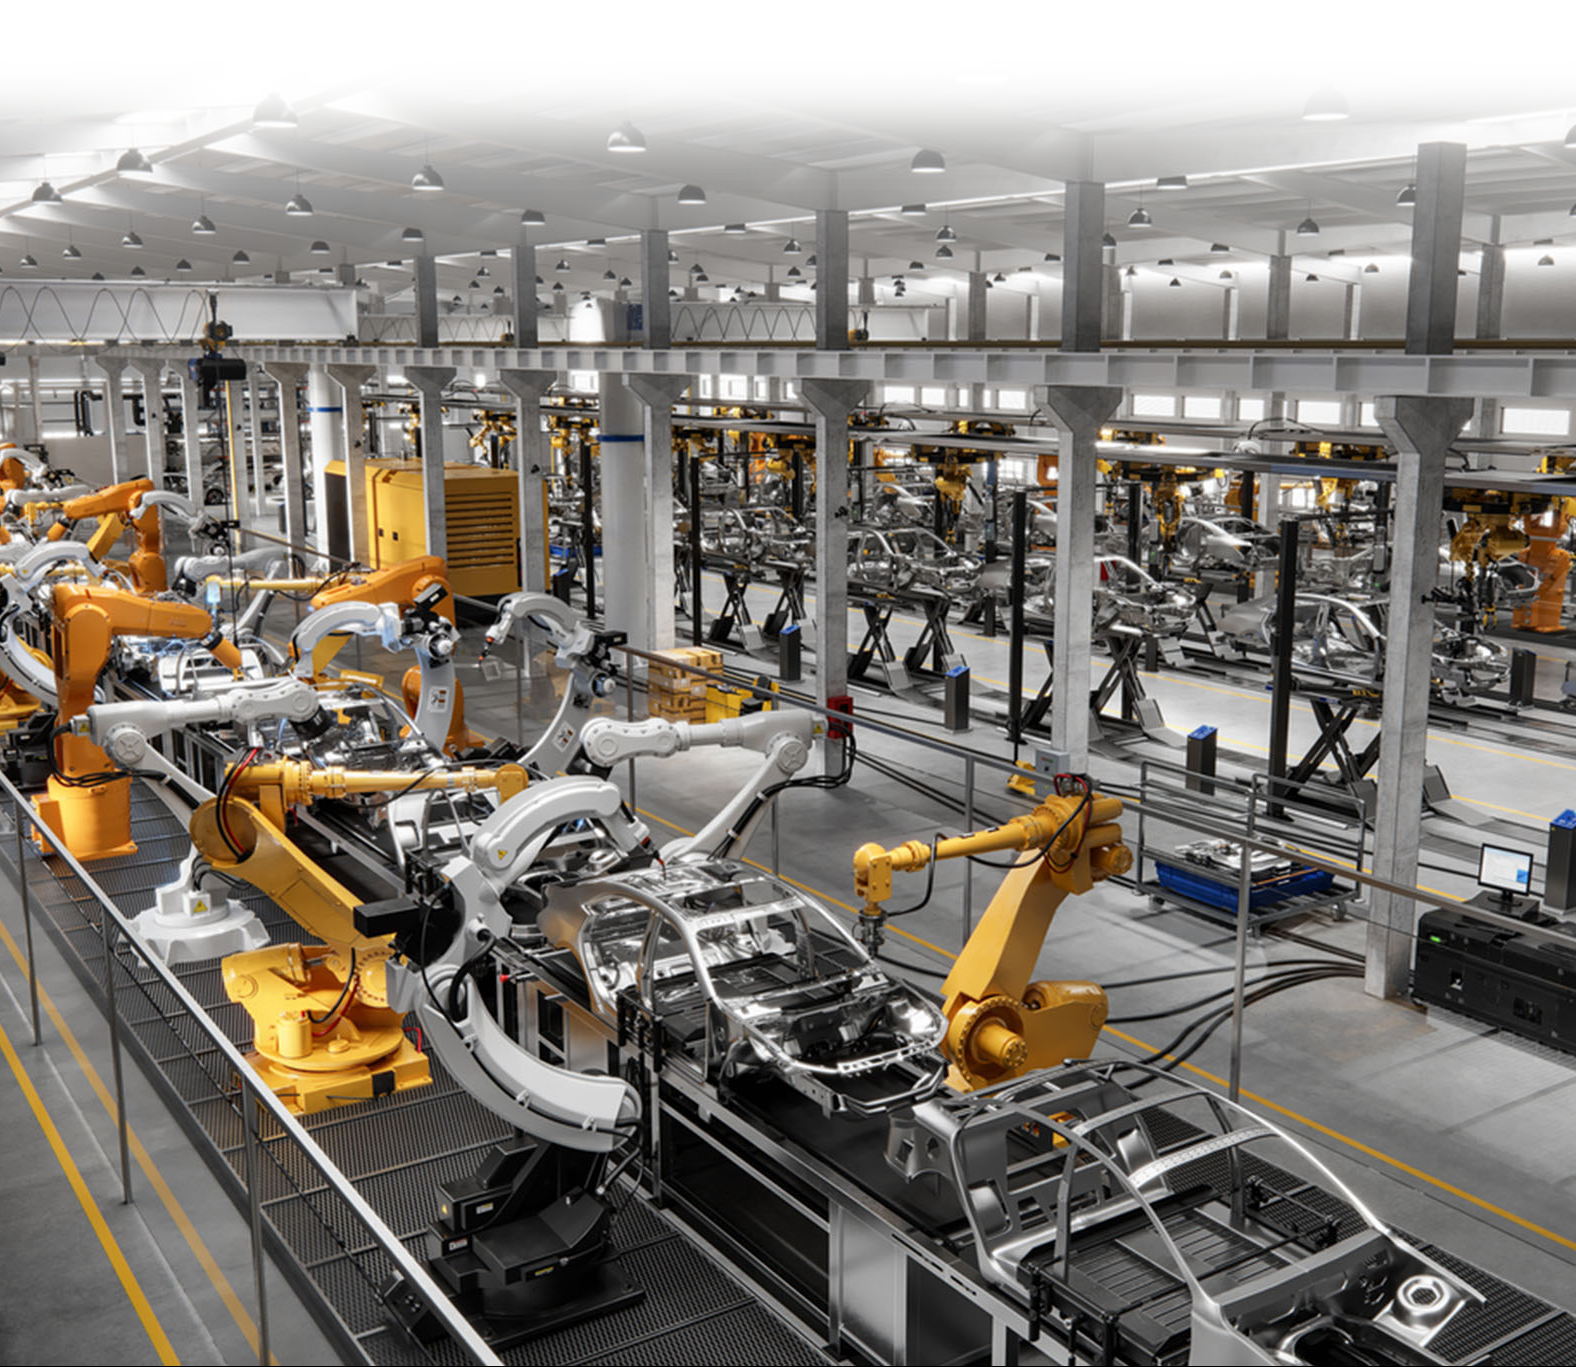 Production lines with several pieces of equipment greatly benefit from using MES software.